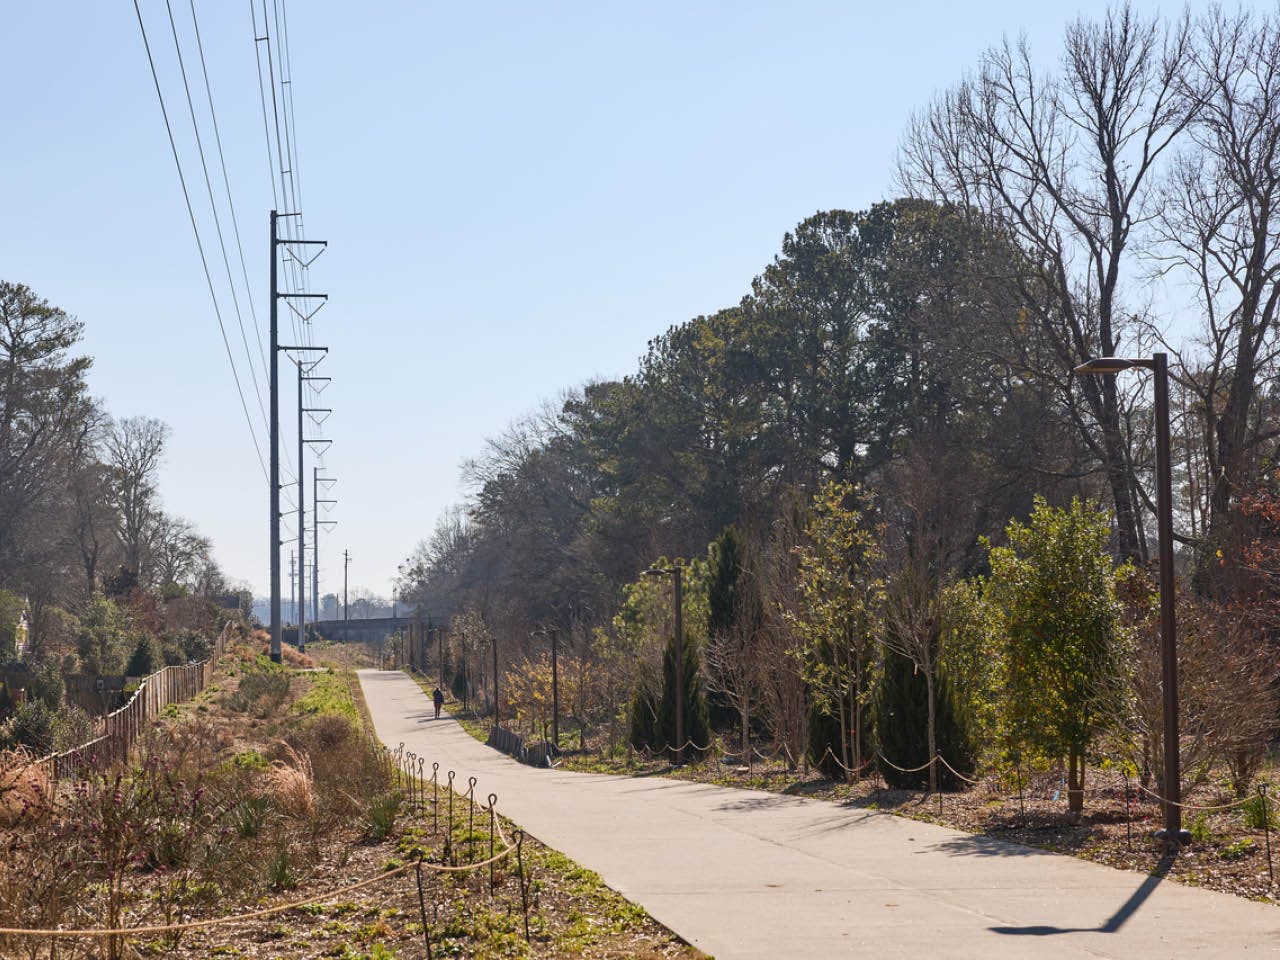 The Atlanta Beltline Arboretum lines the Northeast Trail with hundreds of trees and shrubs. (Photo Credit: Erin Sintos)